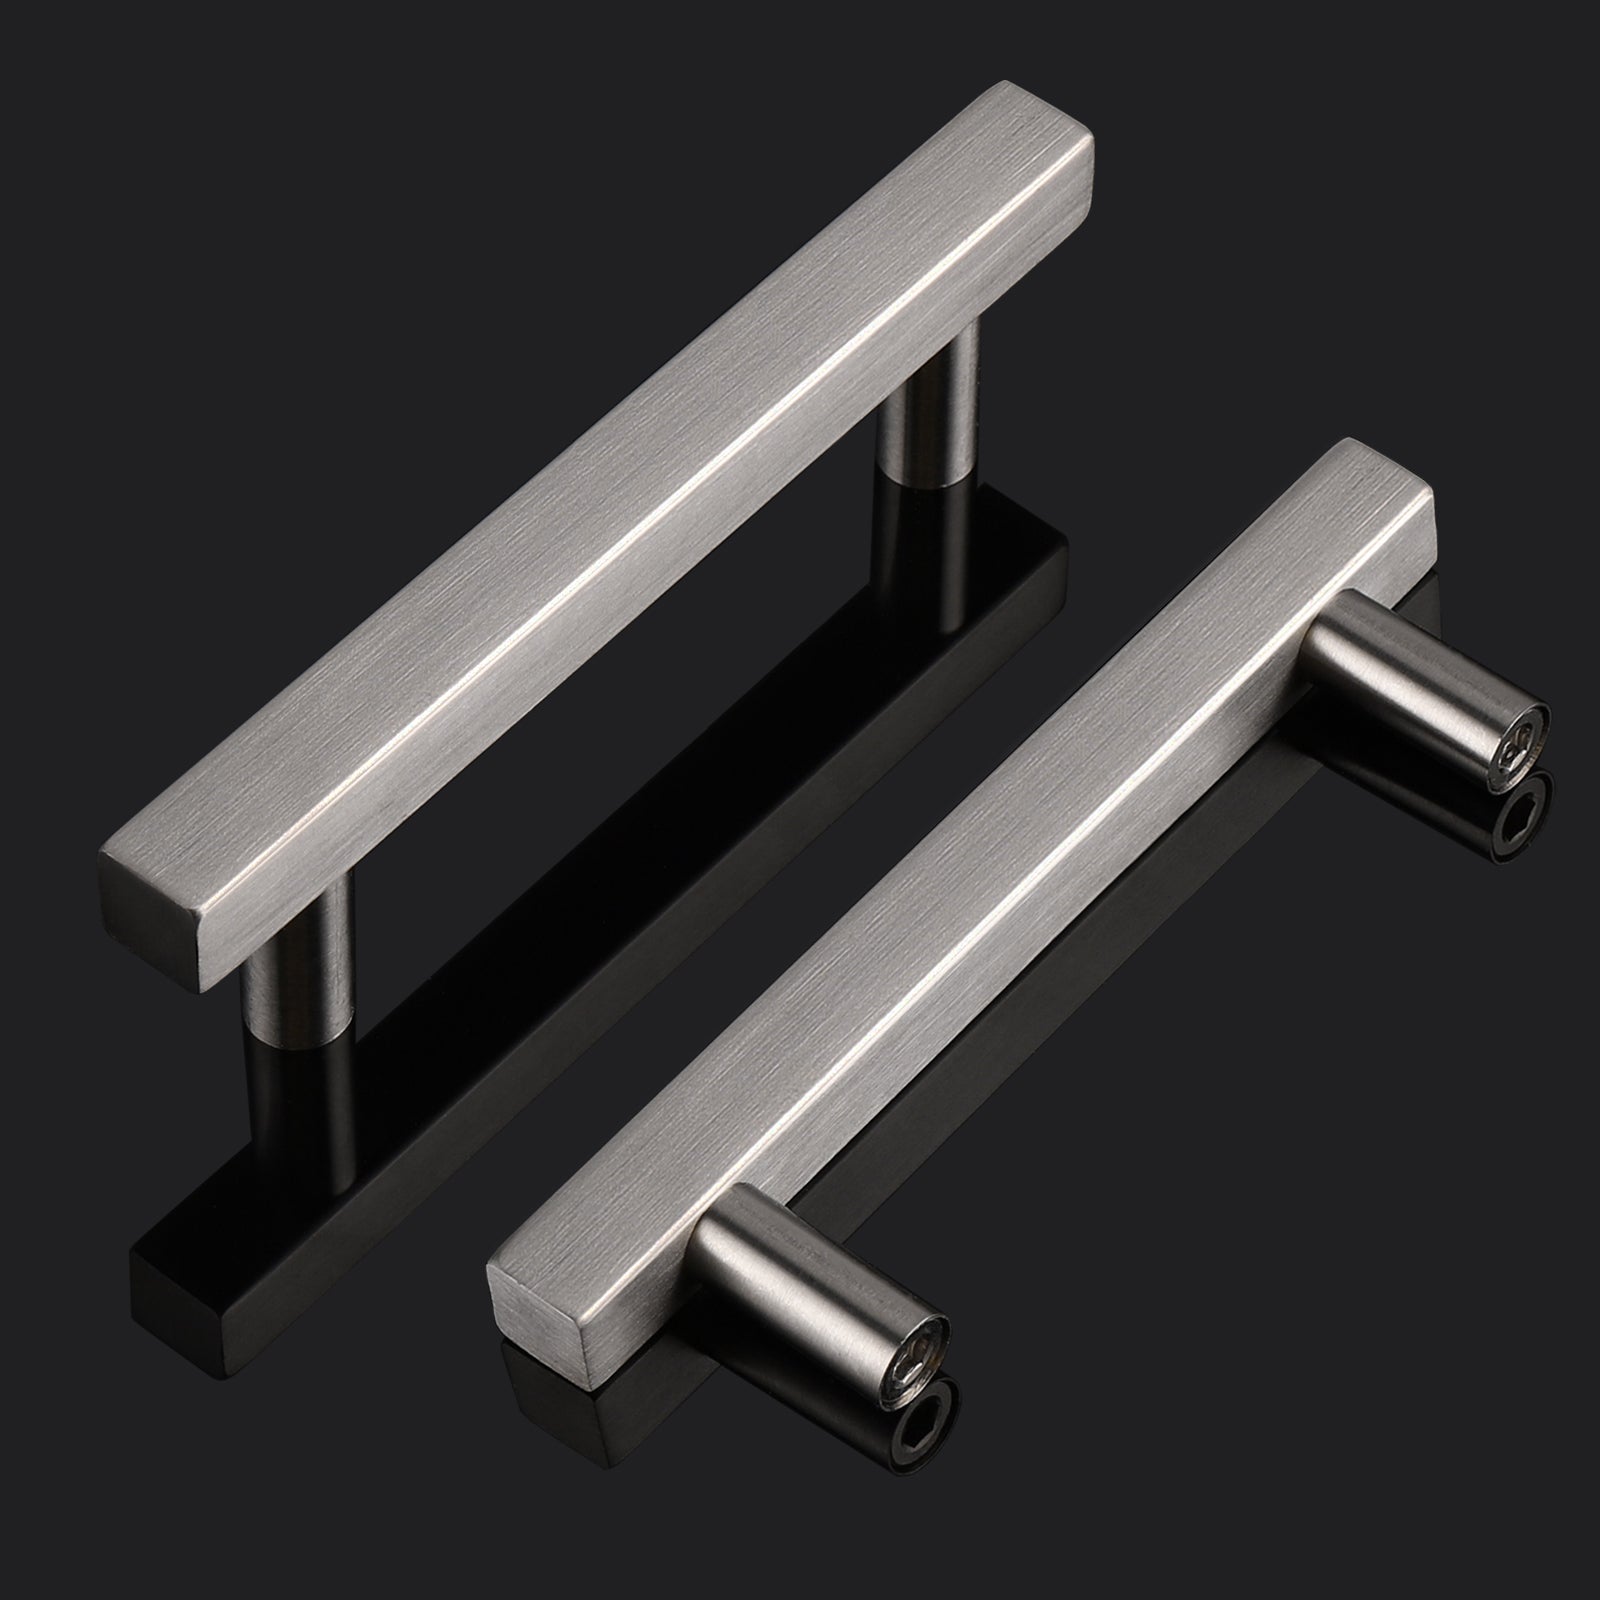 Stainless Steel Cabinet Pulls 2"-10" Hole Centers Square T Bar Handles and Knobs